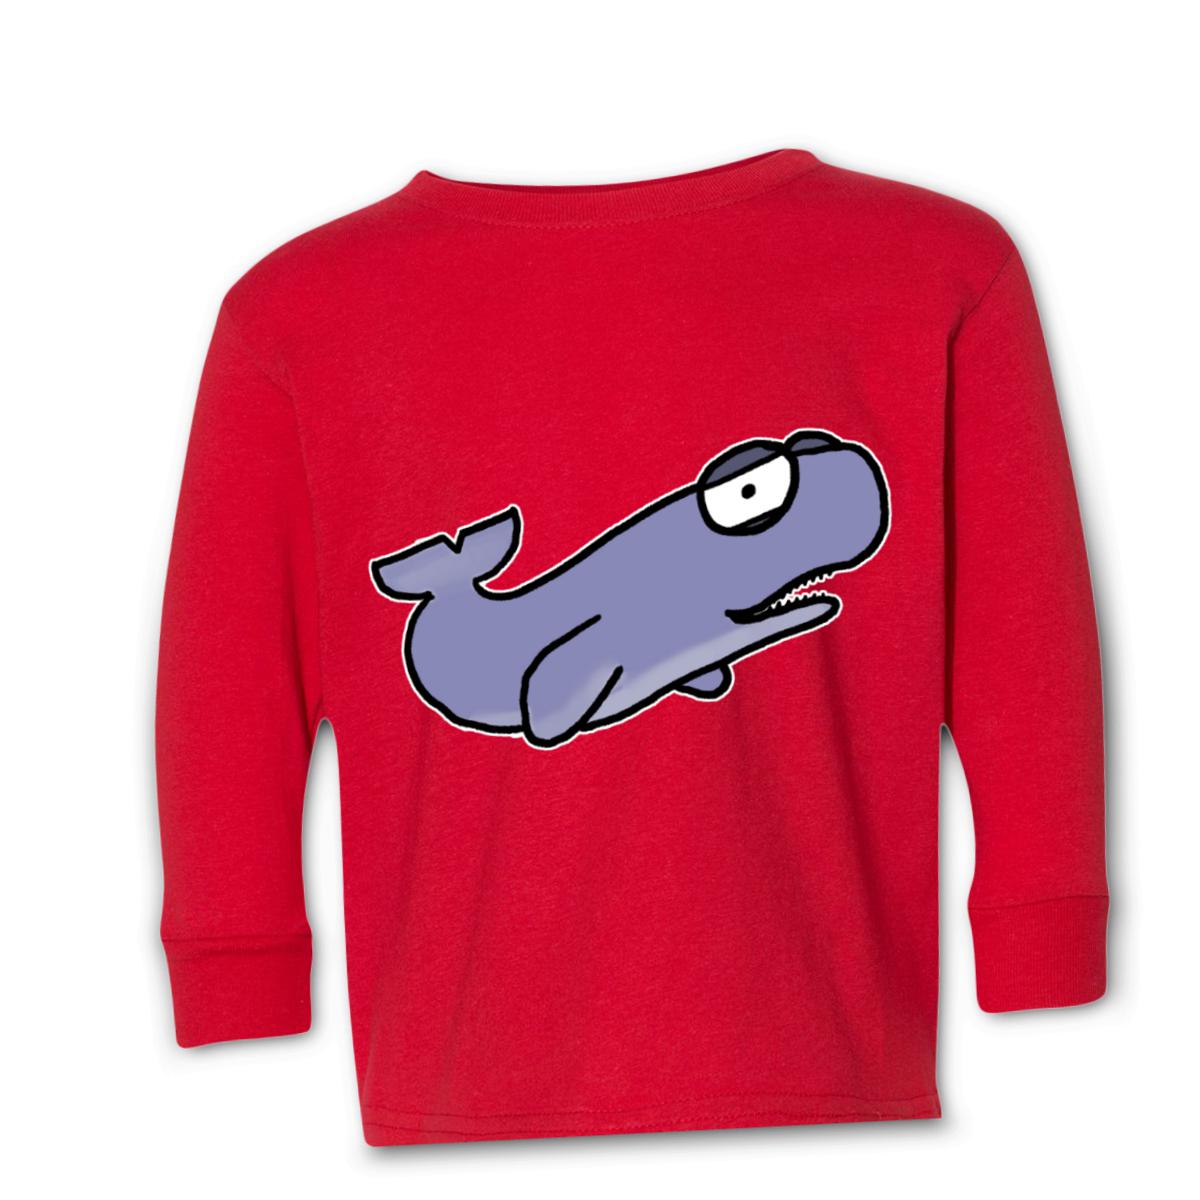 Sperm Whale Toddler Long Sleeve Tee 4T red